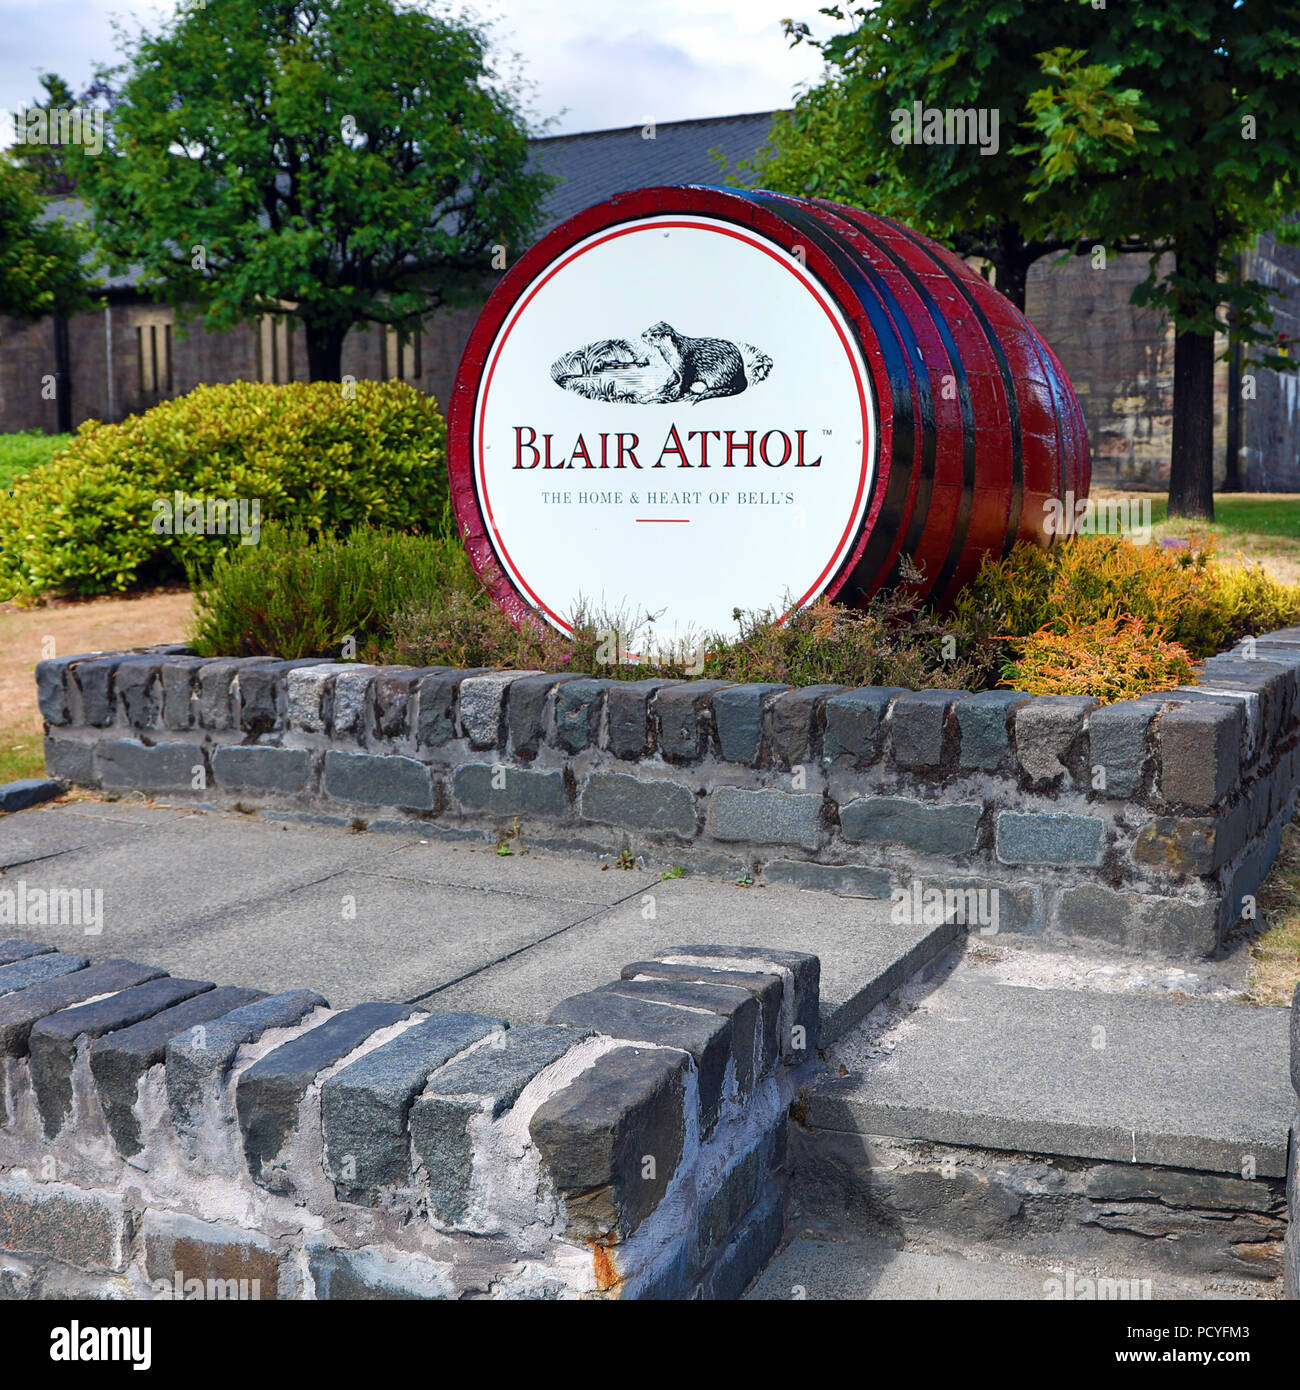 Blair Athol Whisky Distillery In Pitlochry Perthshire Scotland Stock Photo Alamy